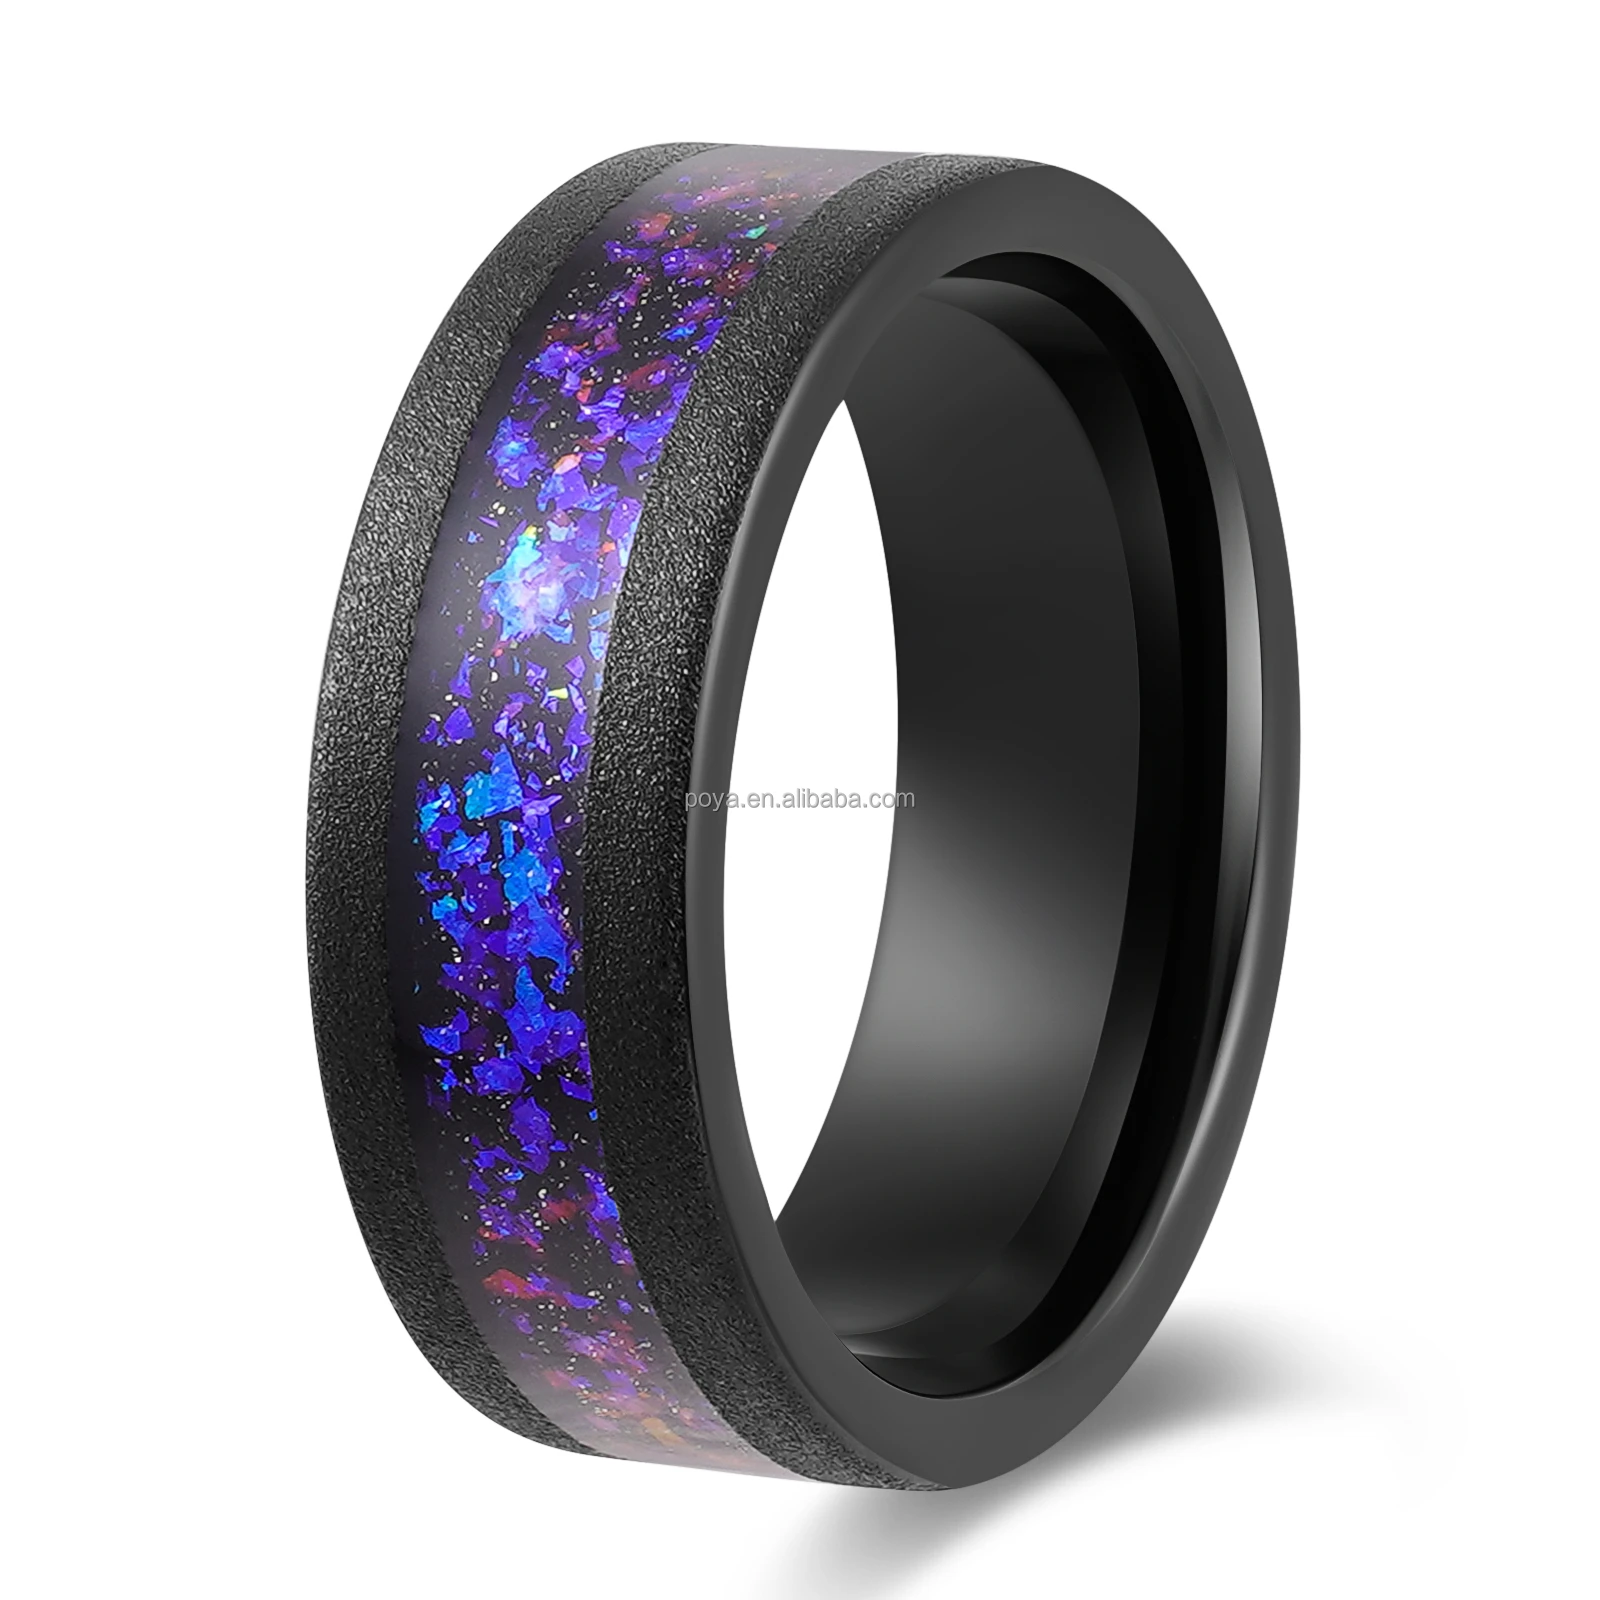 Poya Space Look Black Tungsten Carbide Ring With Sandstone Inlay